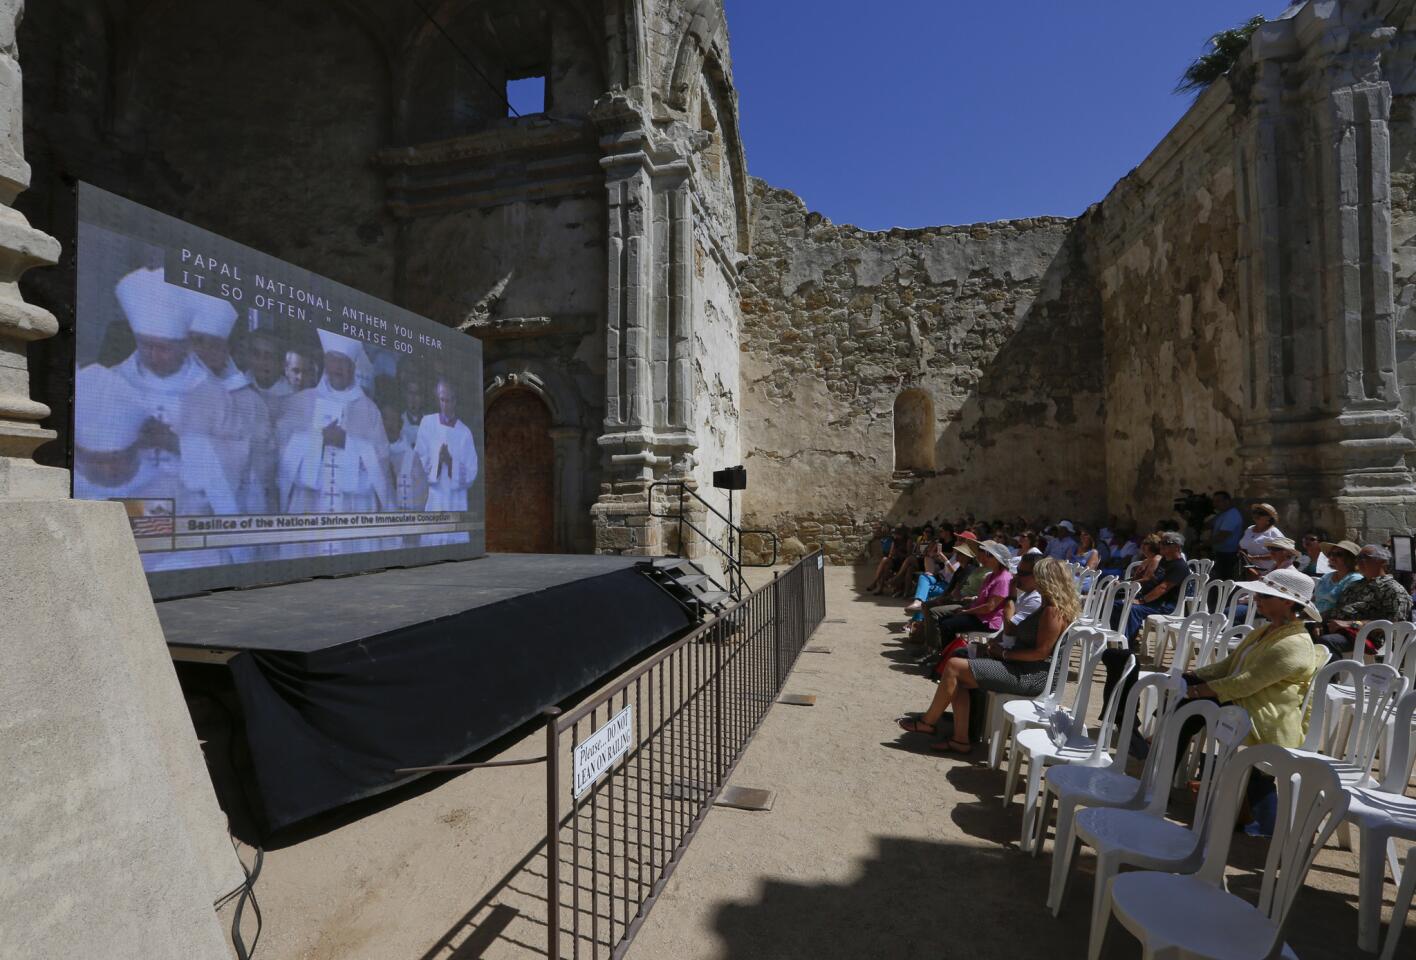 People gather at Mission San Juan Capistrano to watch a live video stream of the canonization of Father Junipero Serra. Pope Francis declared Serra's sainthood during services in Washington, D.C. on Sept. 23.